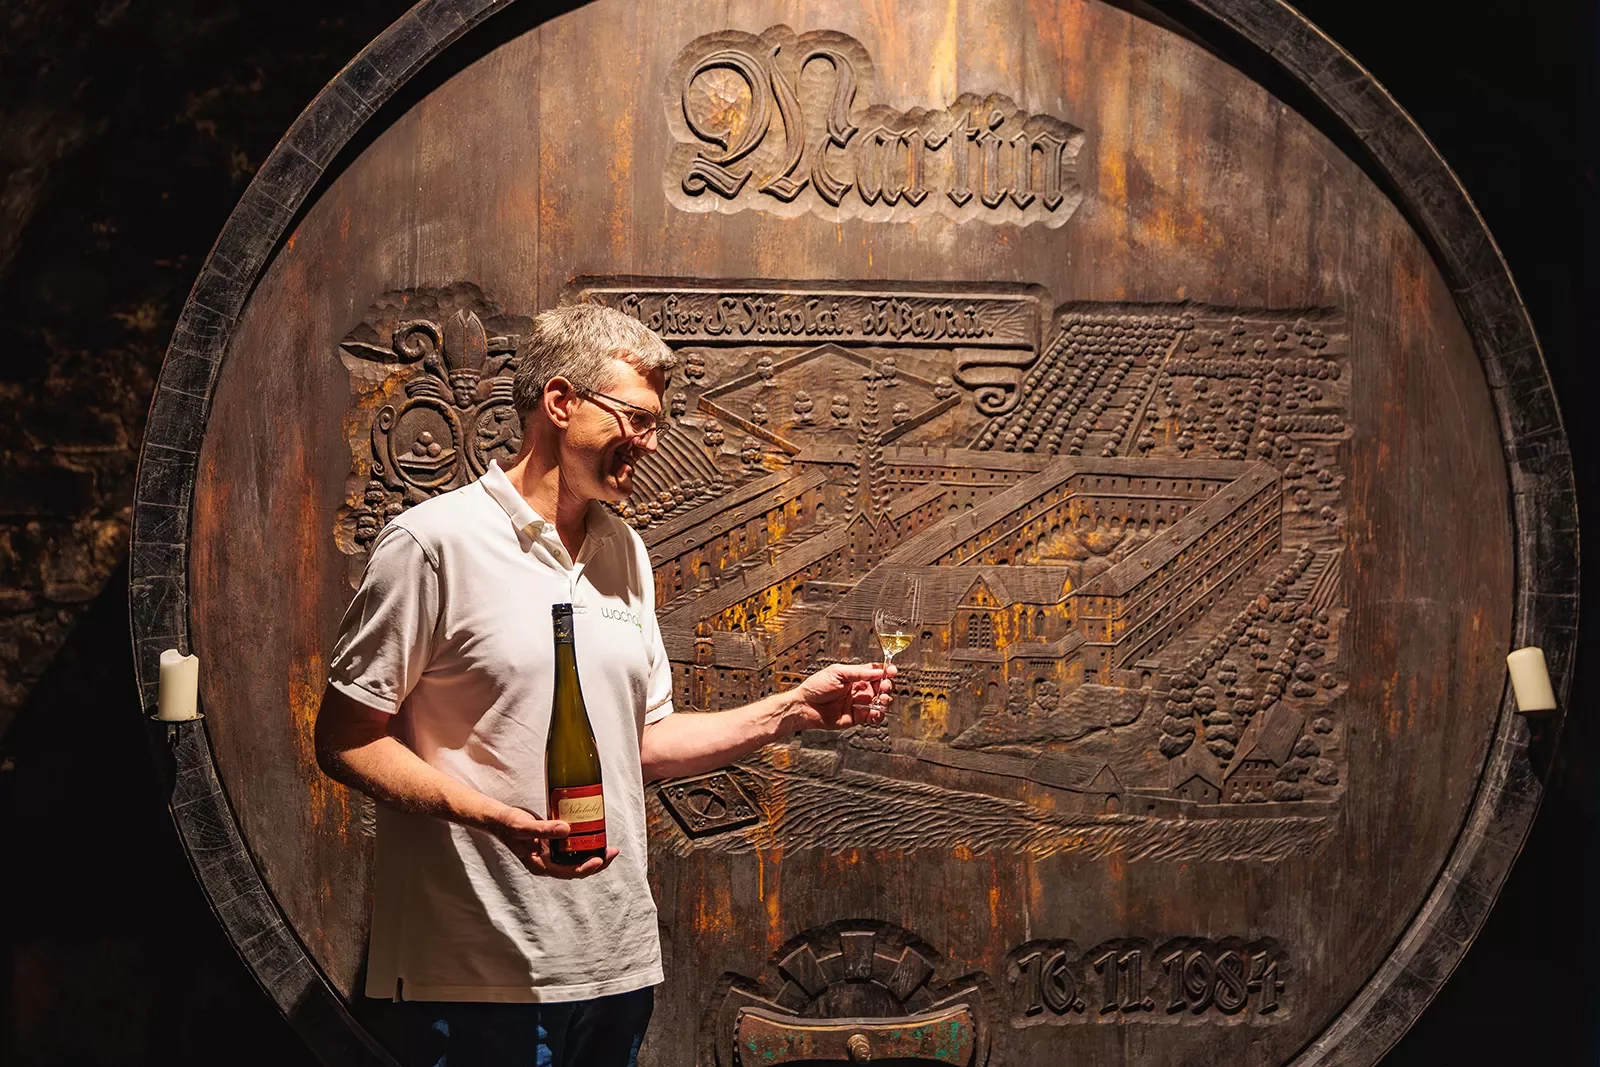 Man holding a bottle of wine in one hand and a glass with wine in the other in front of a very large wine barrel